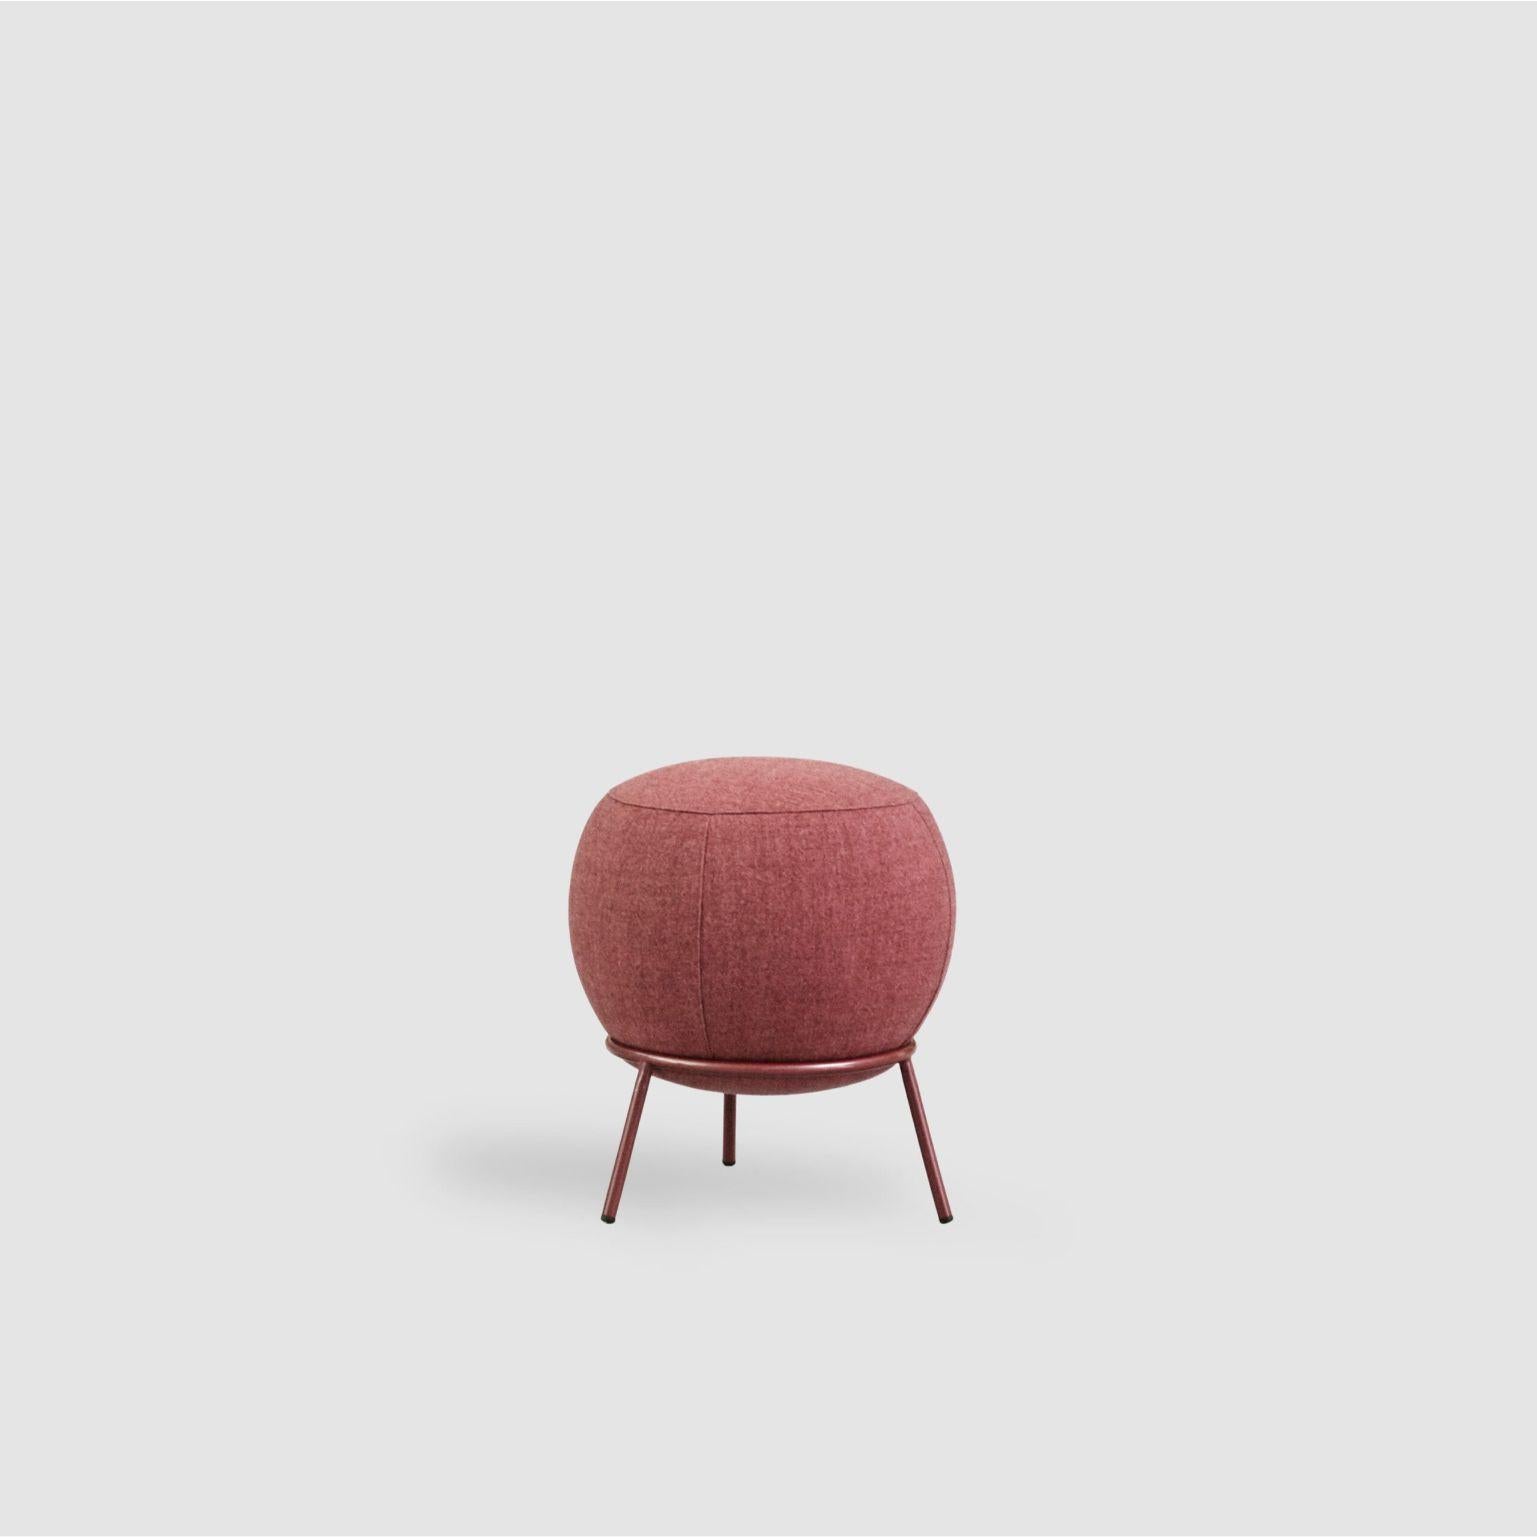 Nest ottoman, red by Pepe Albargues
Dimensions: W42, D42, H43
Materials: Iron structure and MDF board
Foam CMHR (high resilience and flame retardant) for all our cushion filling systems
Painted or chromed legs

Also available: Different